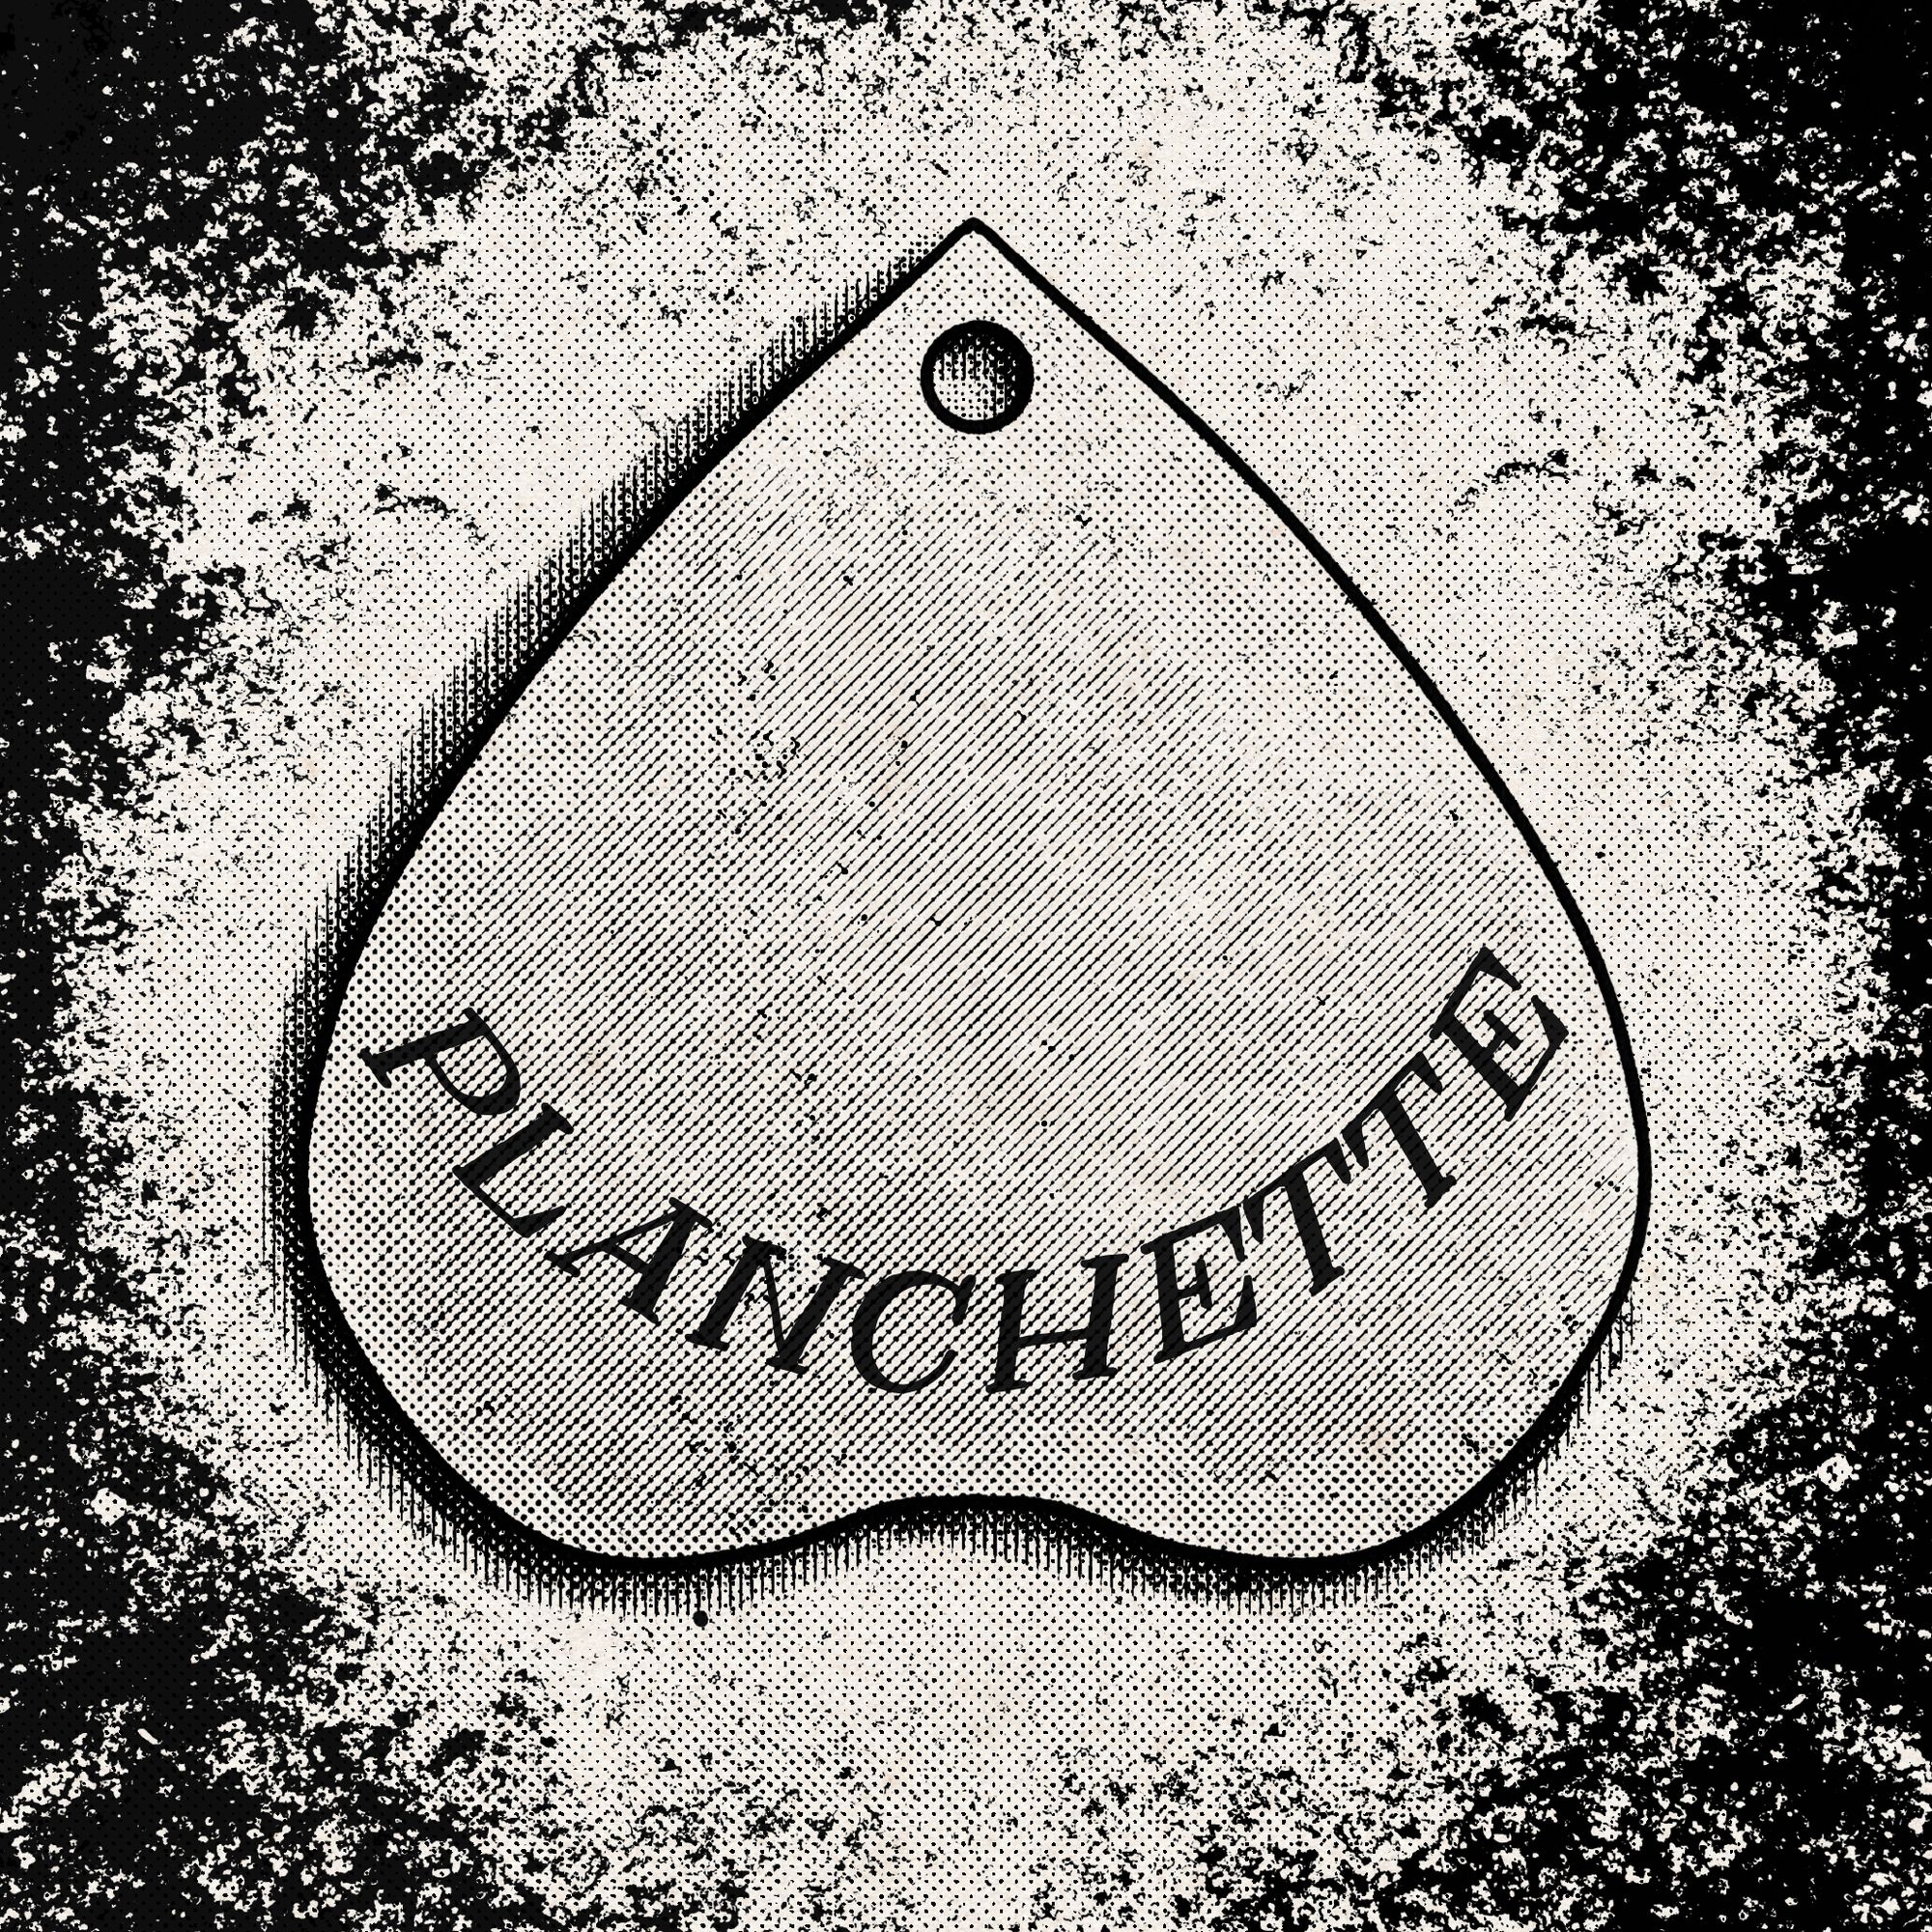 A black and white digital drawing of an automatic writing planchette with halftone shading and a grungy border.